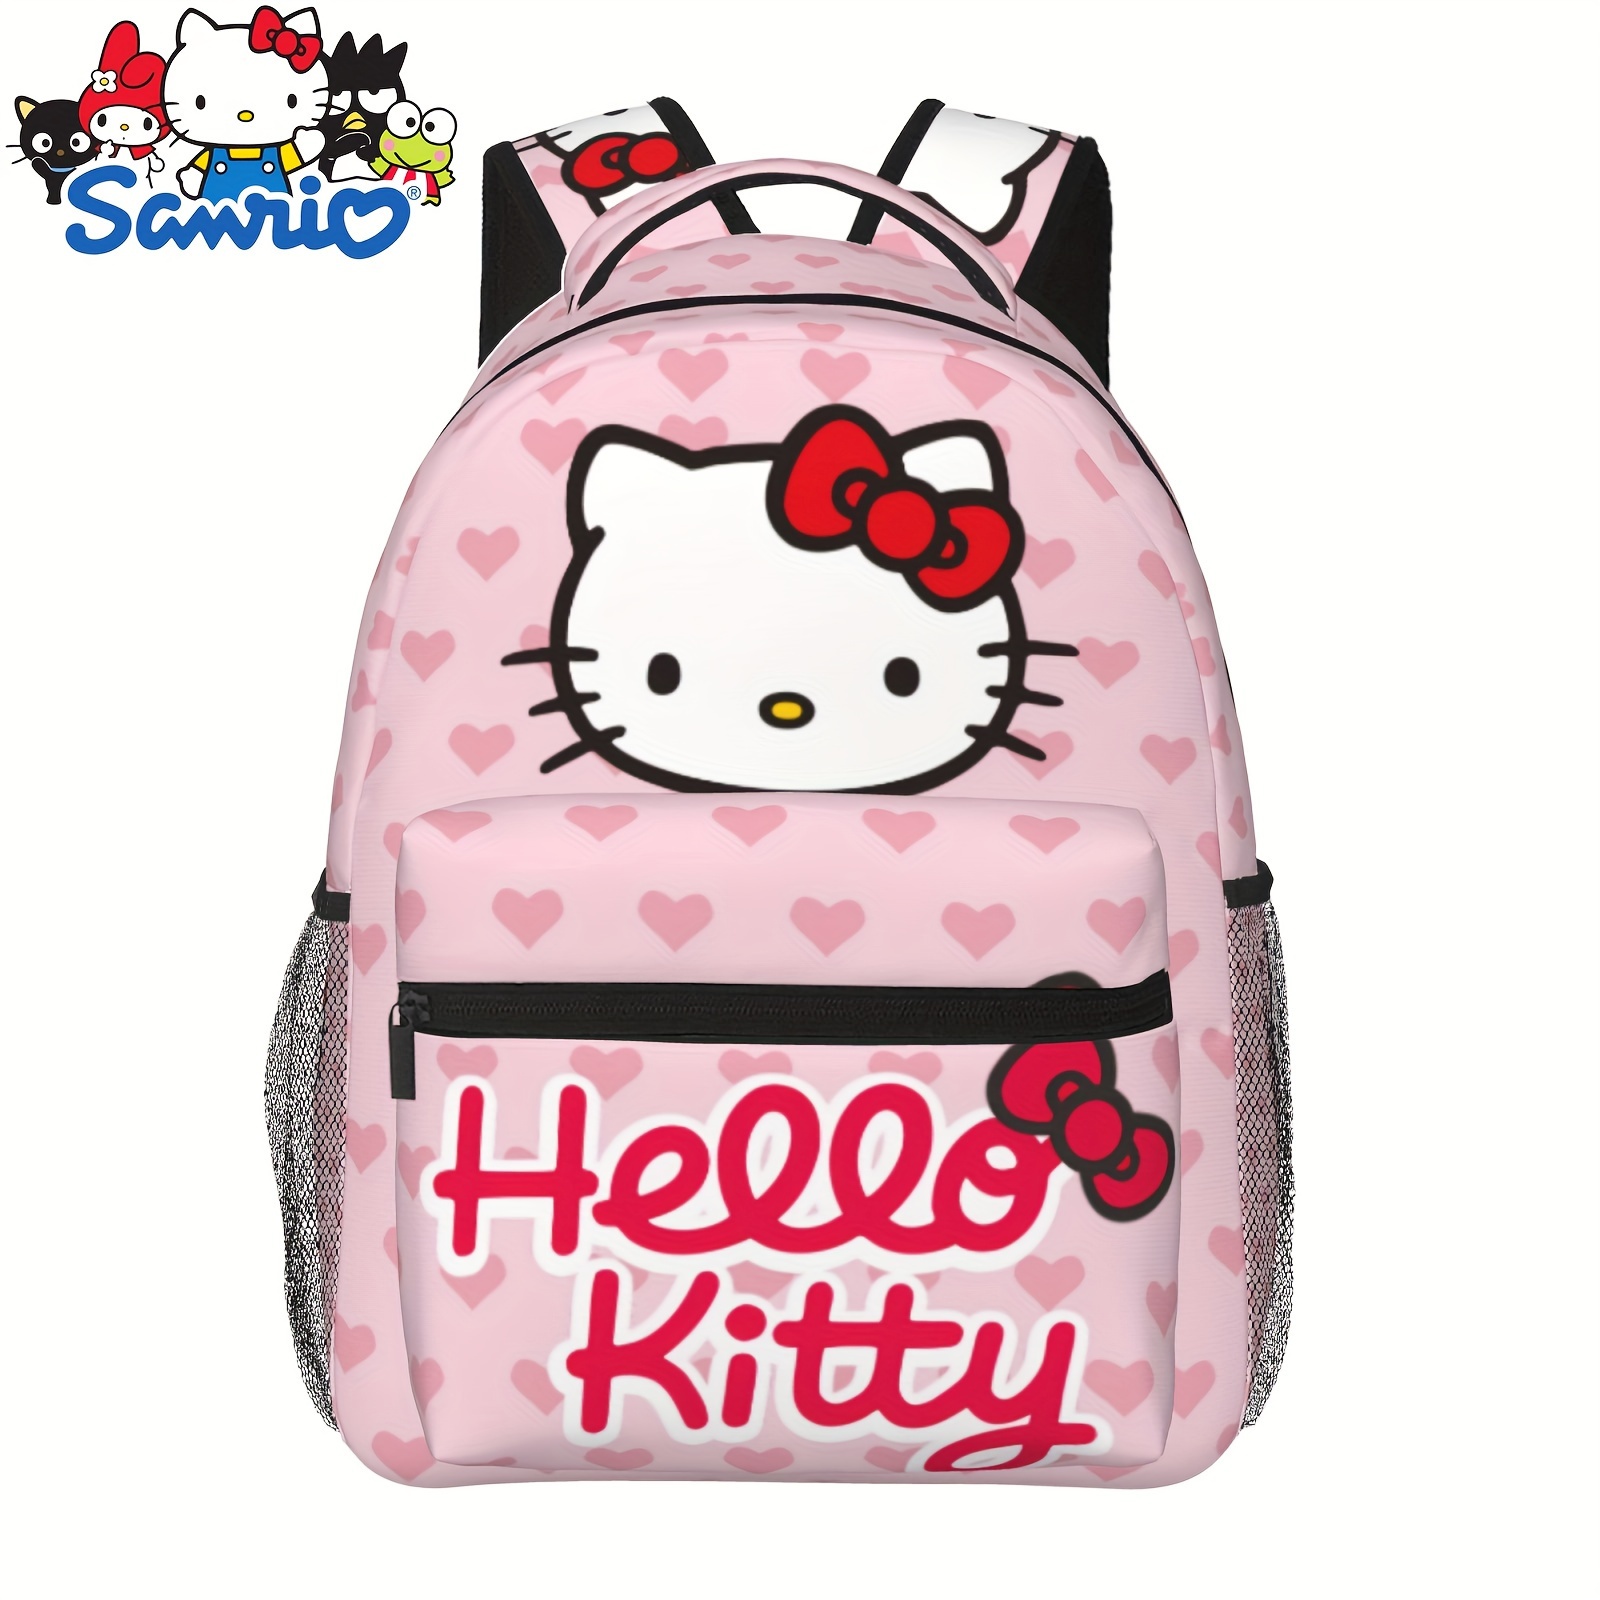 

1pc, Authorized By Sanrio Hello Kitty Backpack Book Bag Unisex Fashion Backpack Bookbag Lightweight Daypack Travel Bag